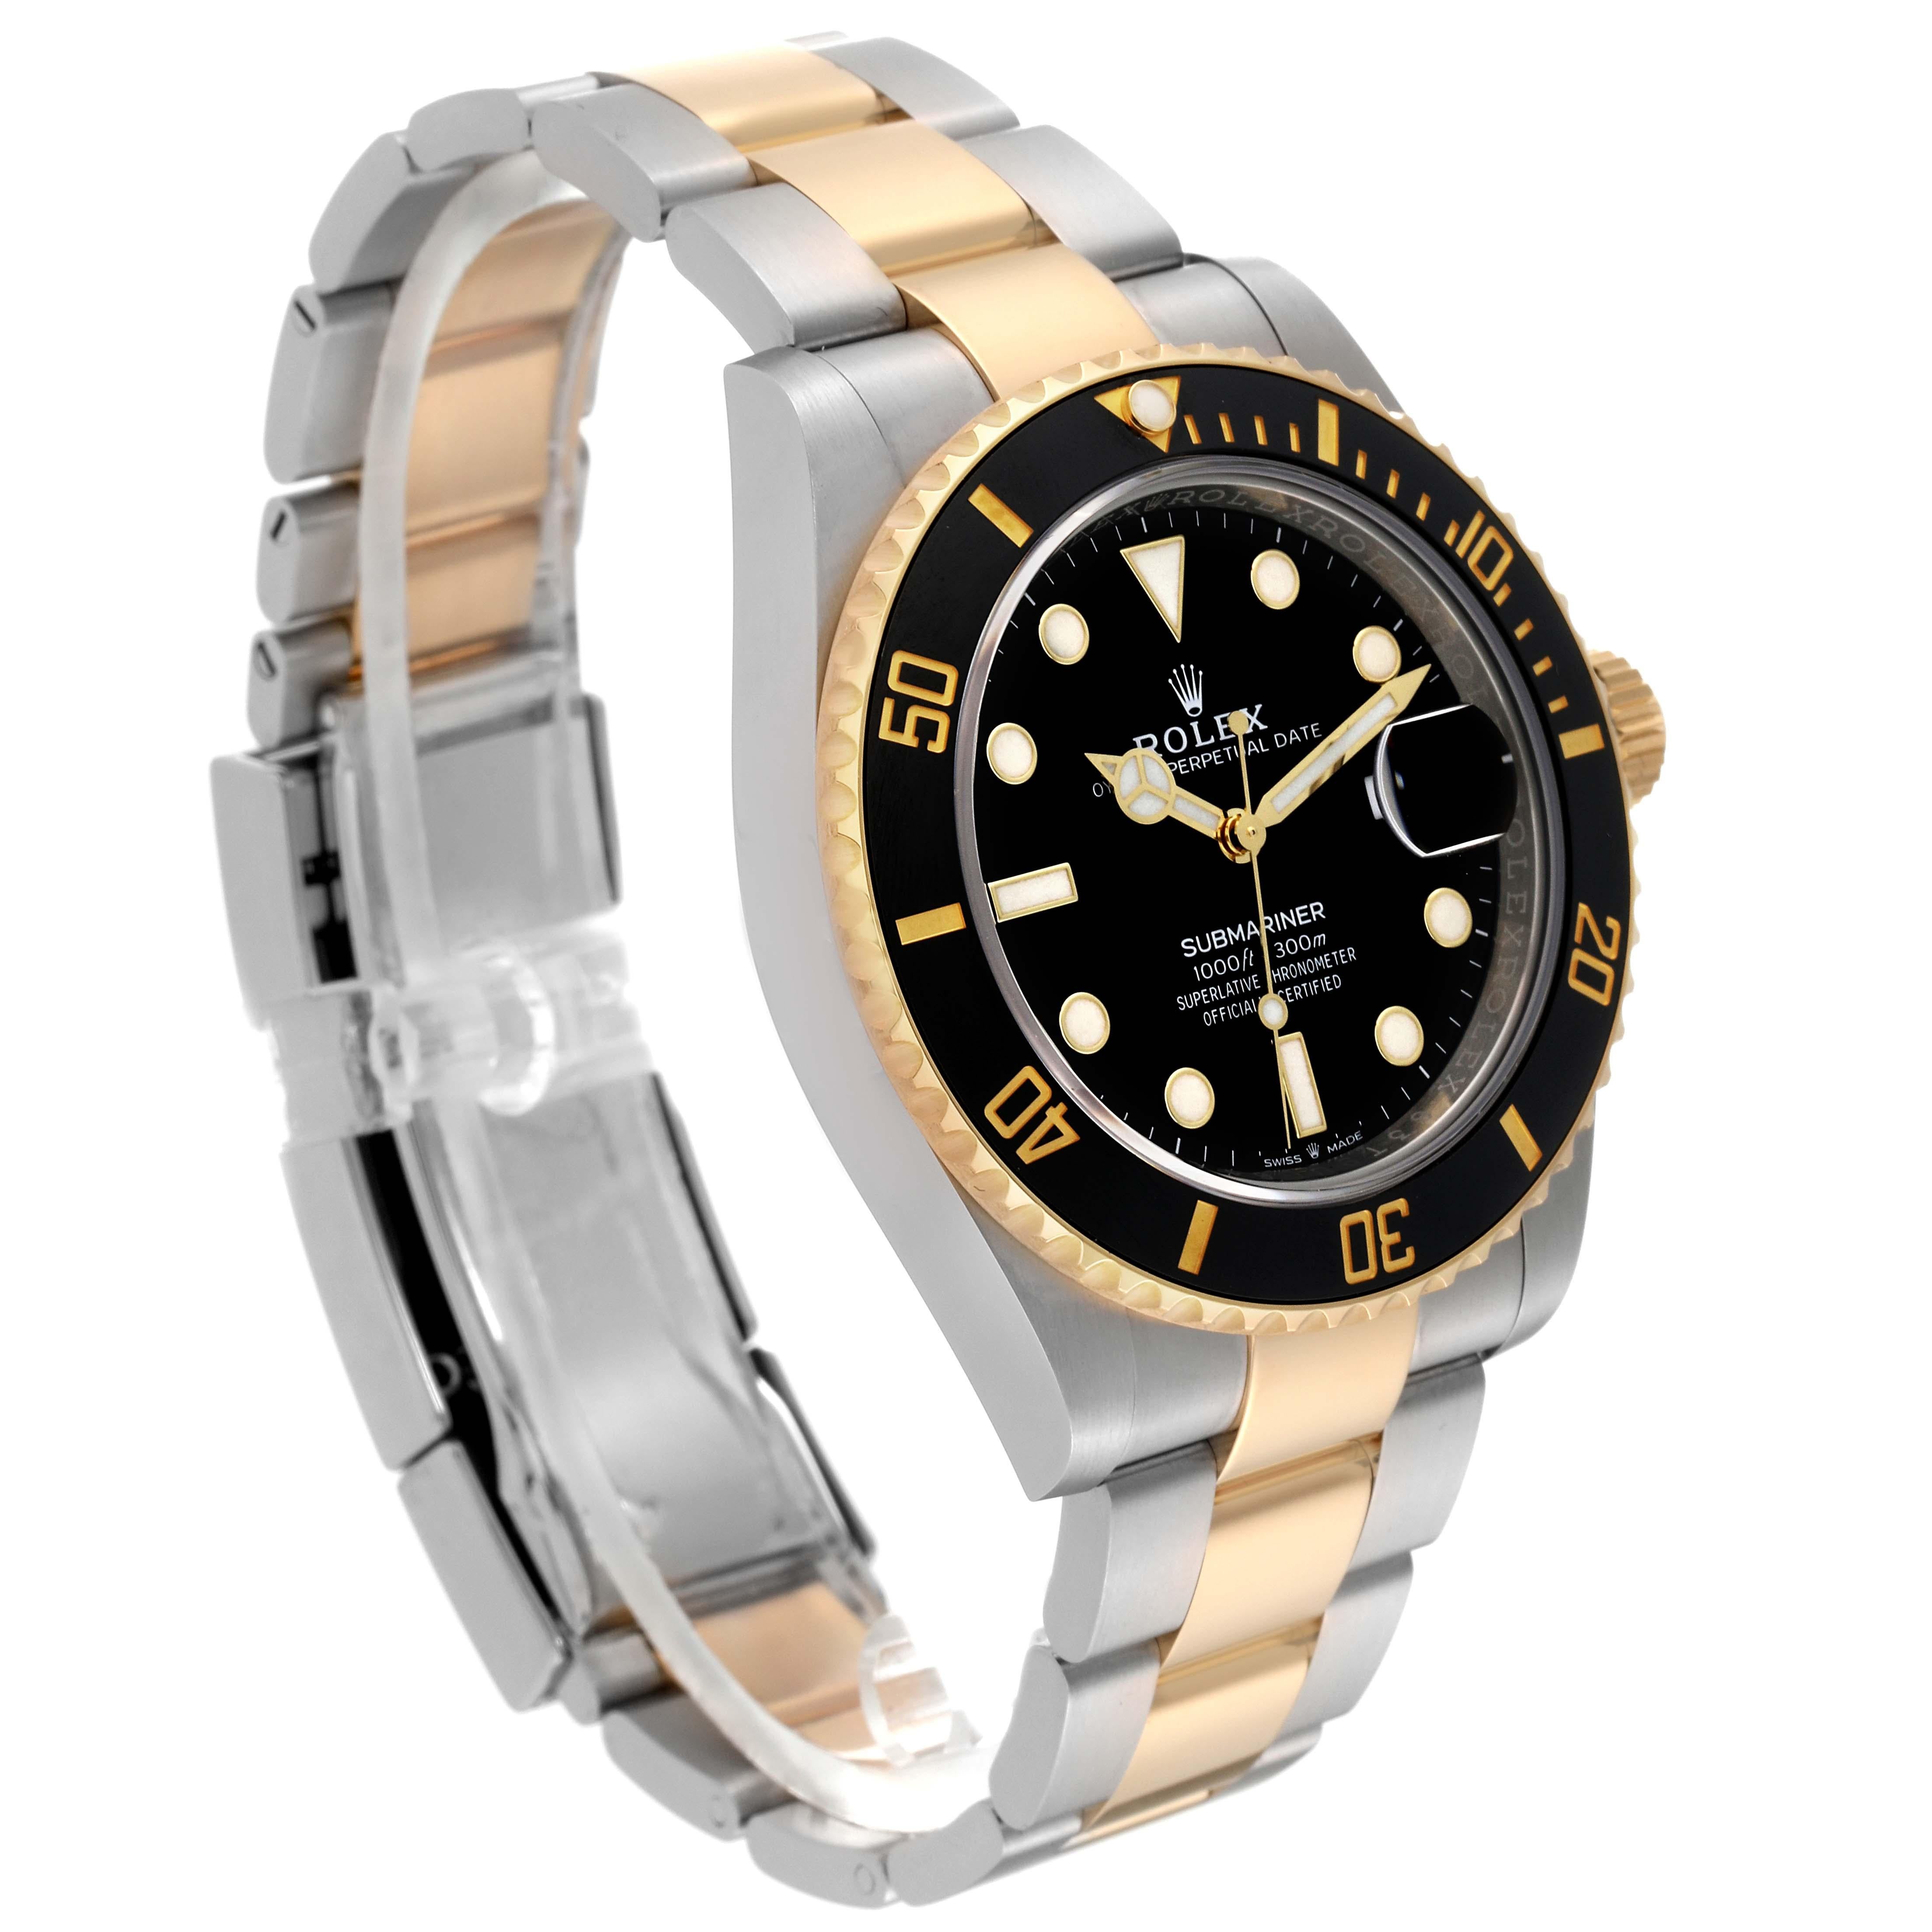 Rolex Submariner 41 Steel Yellow Gold Black Dial Mens Watch 126613 Box Card For Sale 4